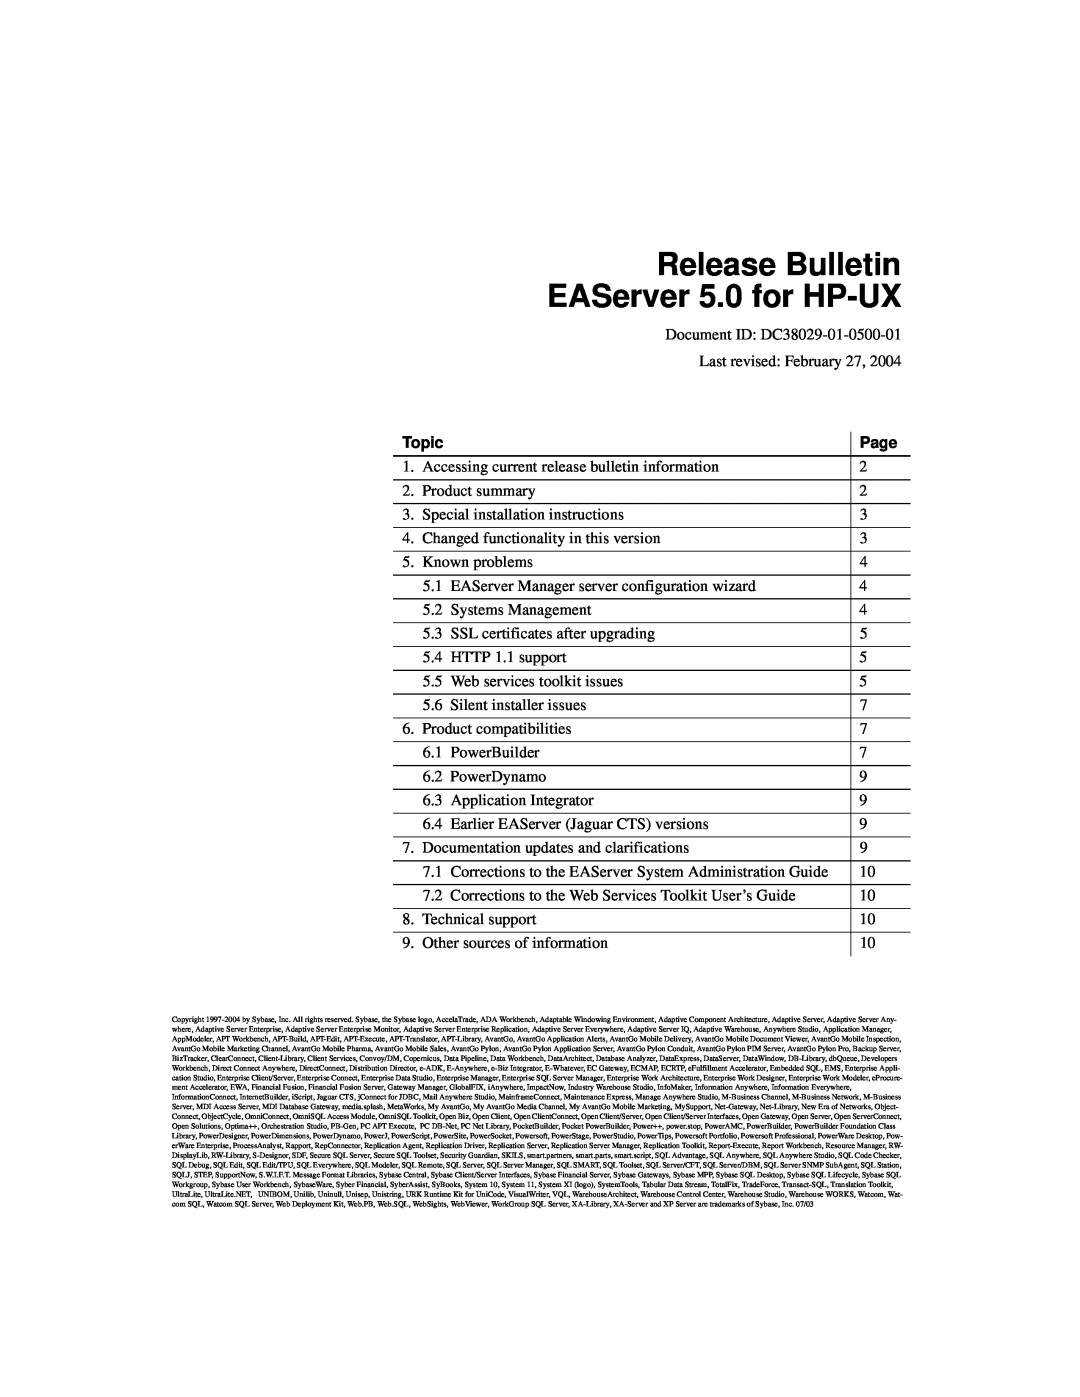 Sybase DC38029-01-0500-01 dimensions Release Bulletin EAServer 5.0 for HP-UX, Topic, Page 